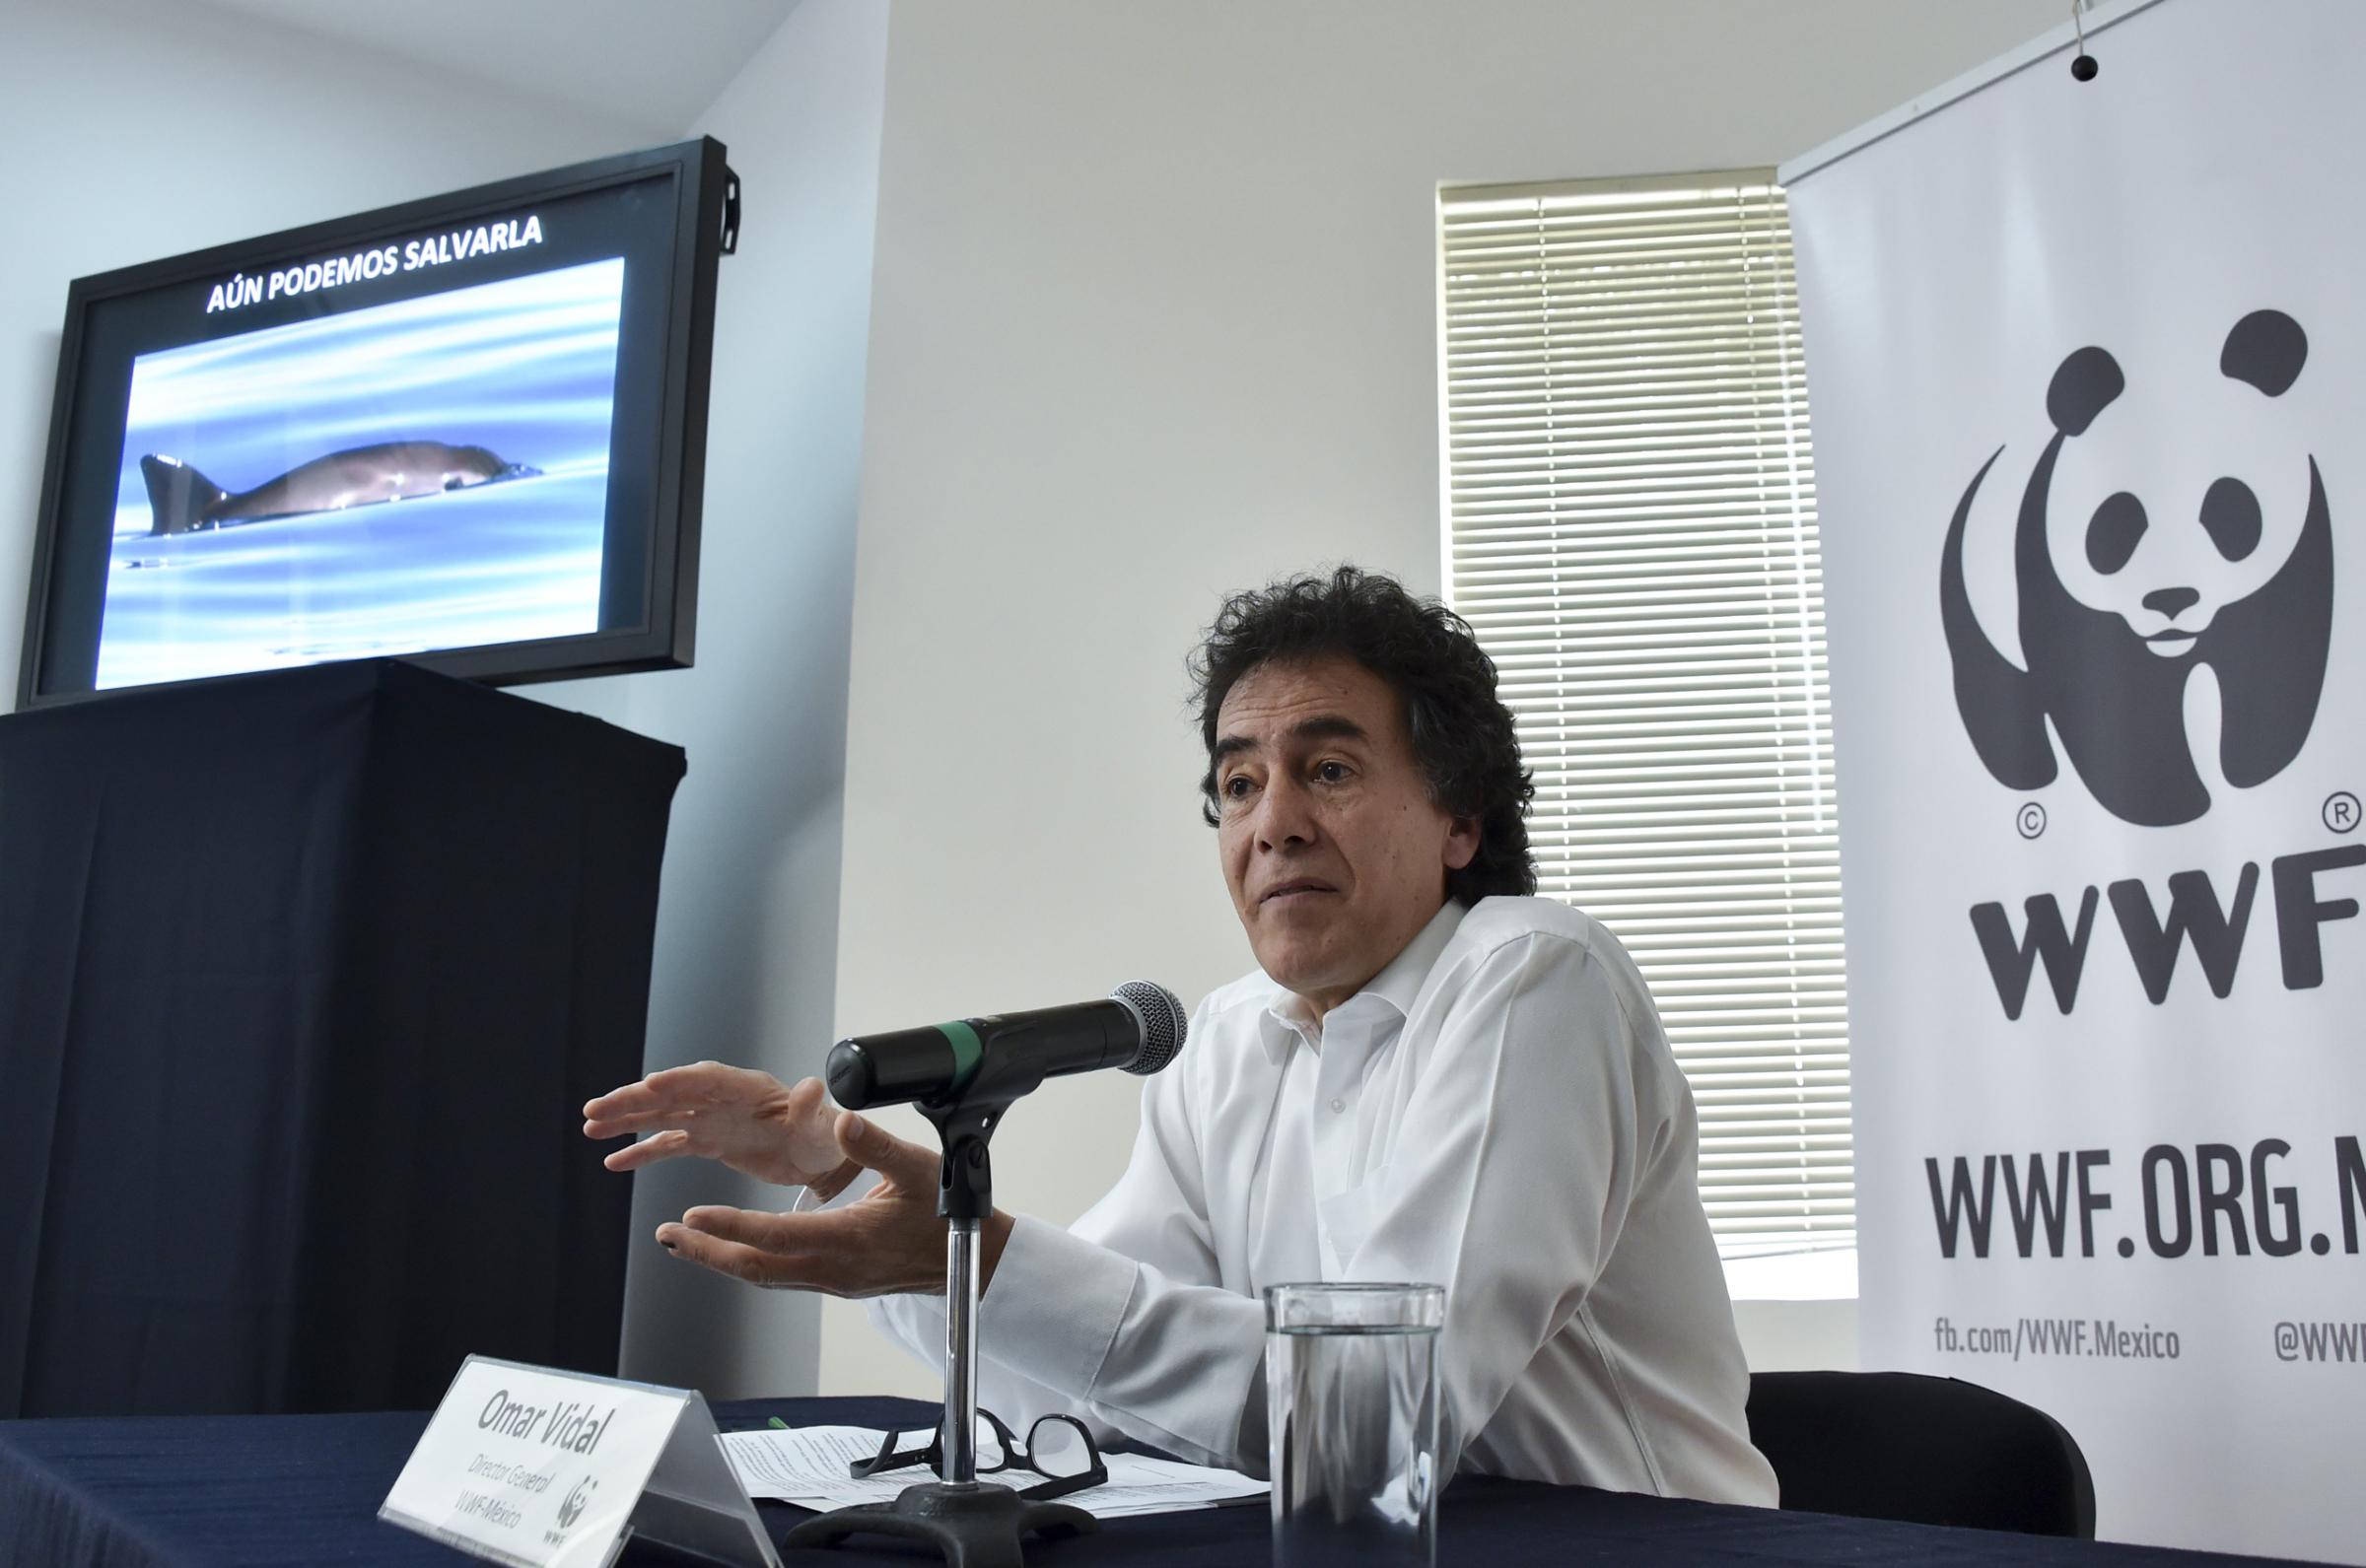 Mexico's General Director of World Wide Fund for Nature (WWF) Omar Vidal speaks during a press conference next to the image of a "vaquita marina" (Phocoena sinus) on a screen, in Mexico City on May 16, 2016. Environmentalists of WWF warned that Mexico's vaquita marina, the world's smallest porpoise, was close to extinction as the government reported that only 60 were now left. / AFP / YURI CORTEZ (Photo credit should read YURI CORTEZ/AFP/Getty Images)